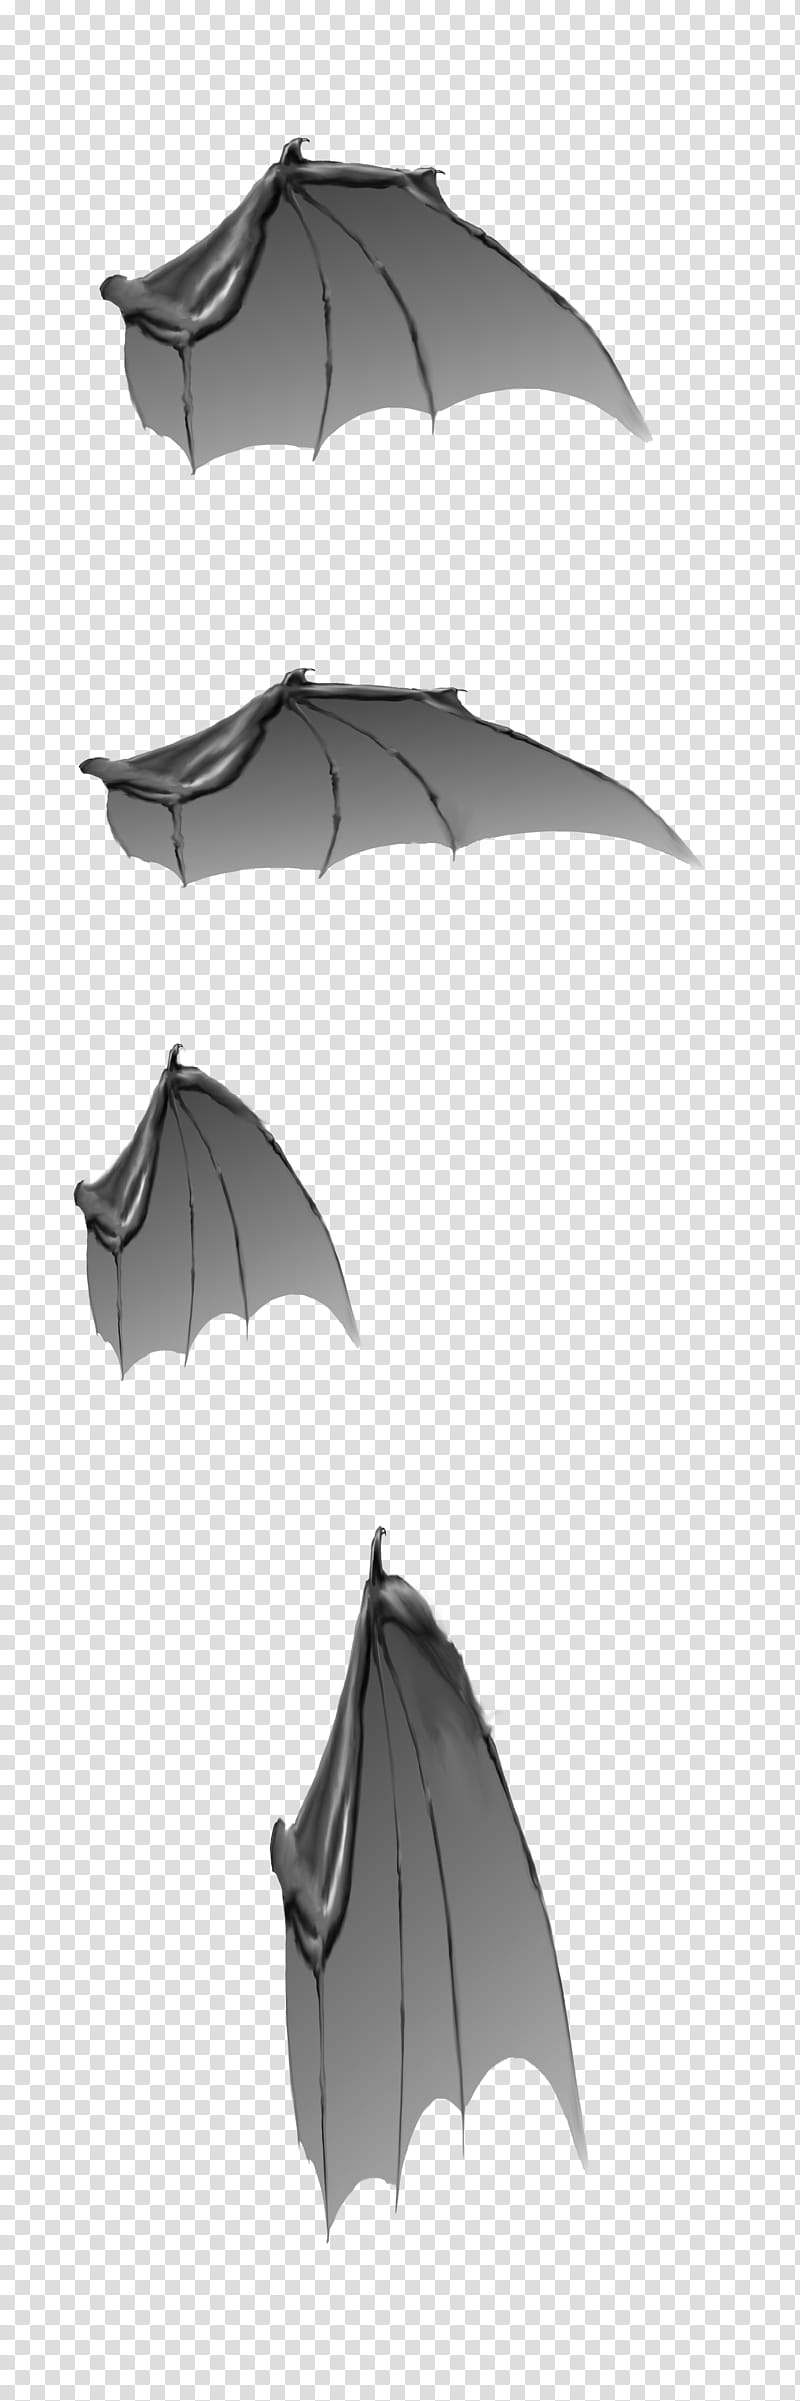 Bat wings transparent background PNG cliparts free download | HiClipart